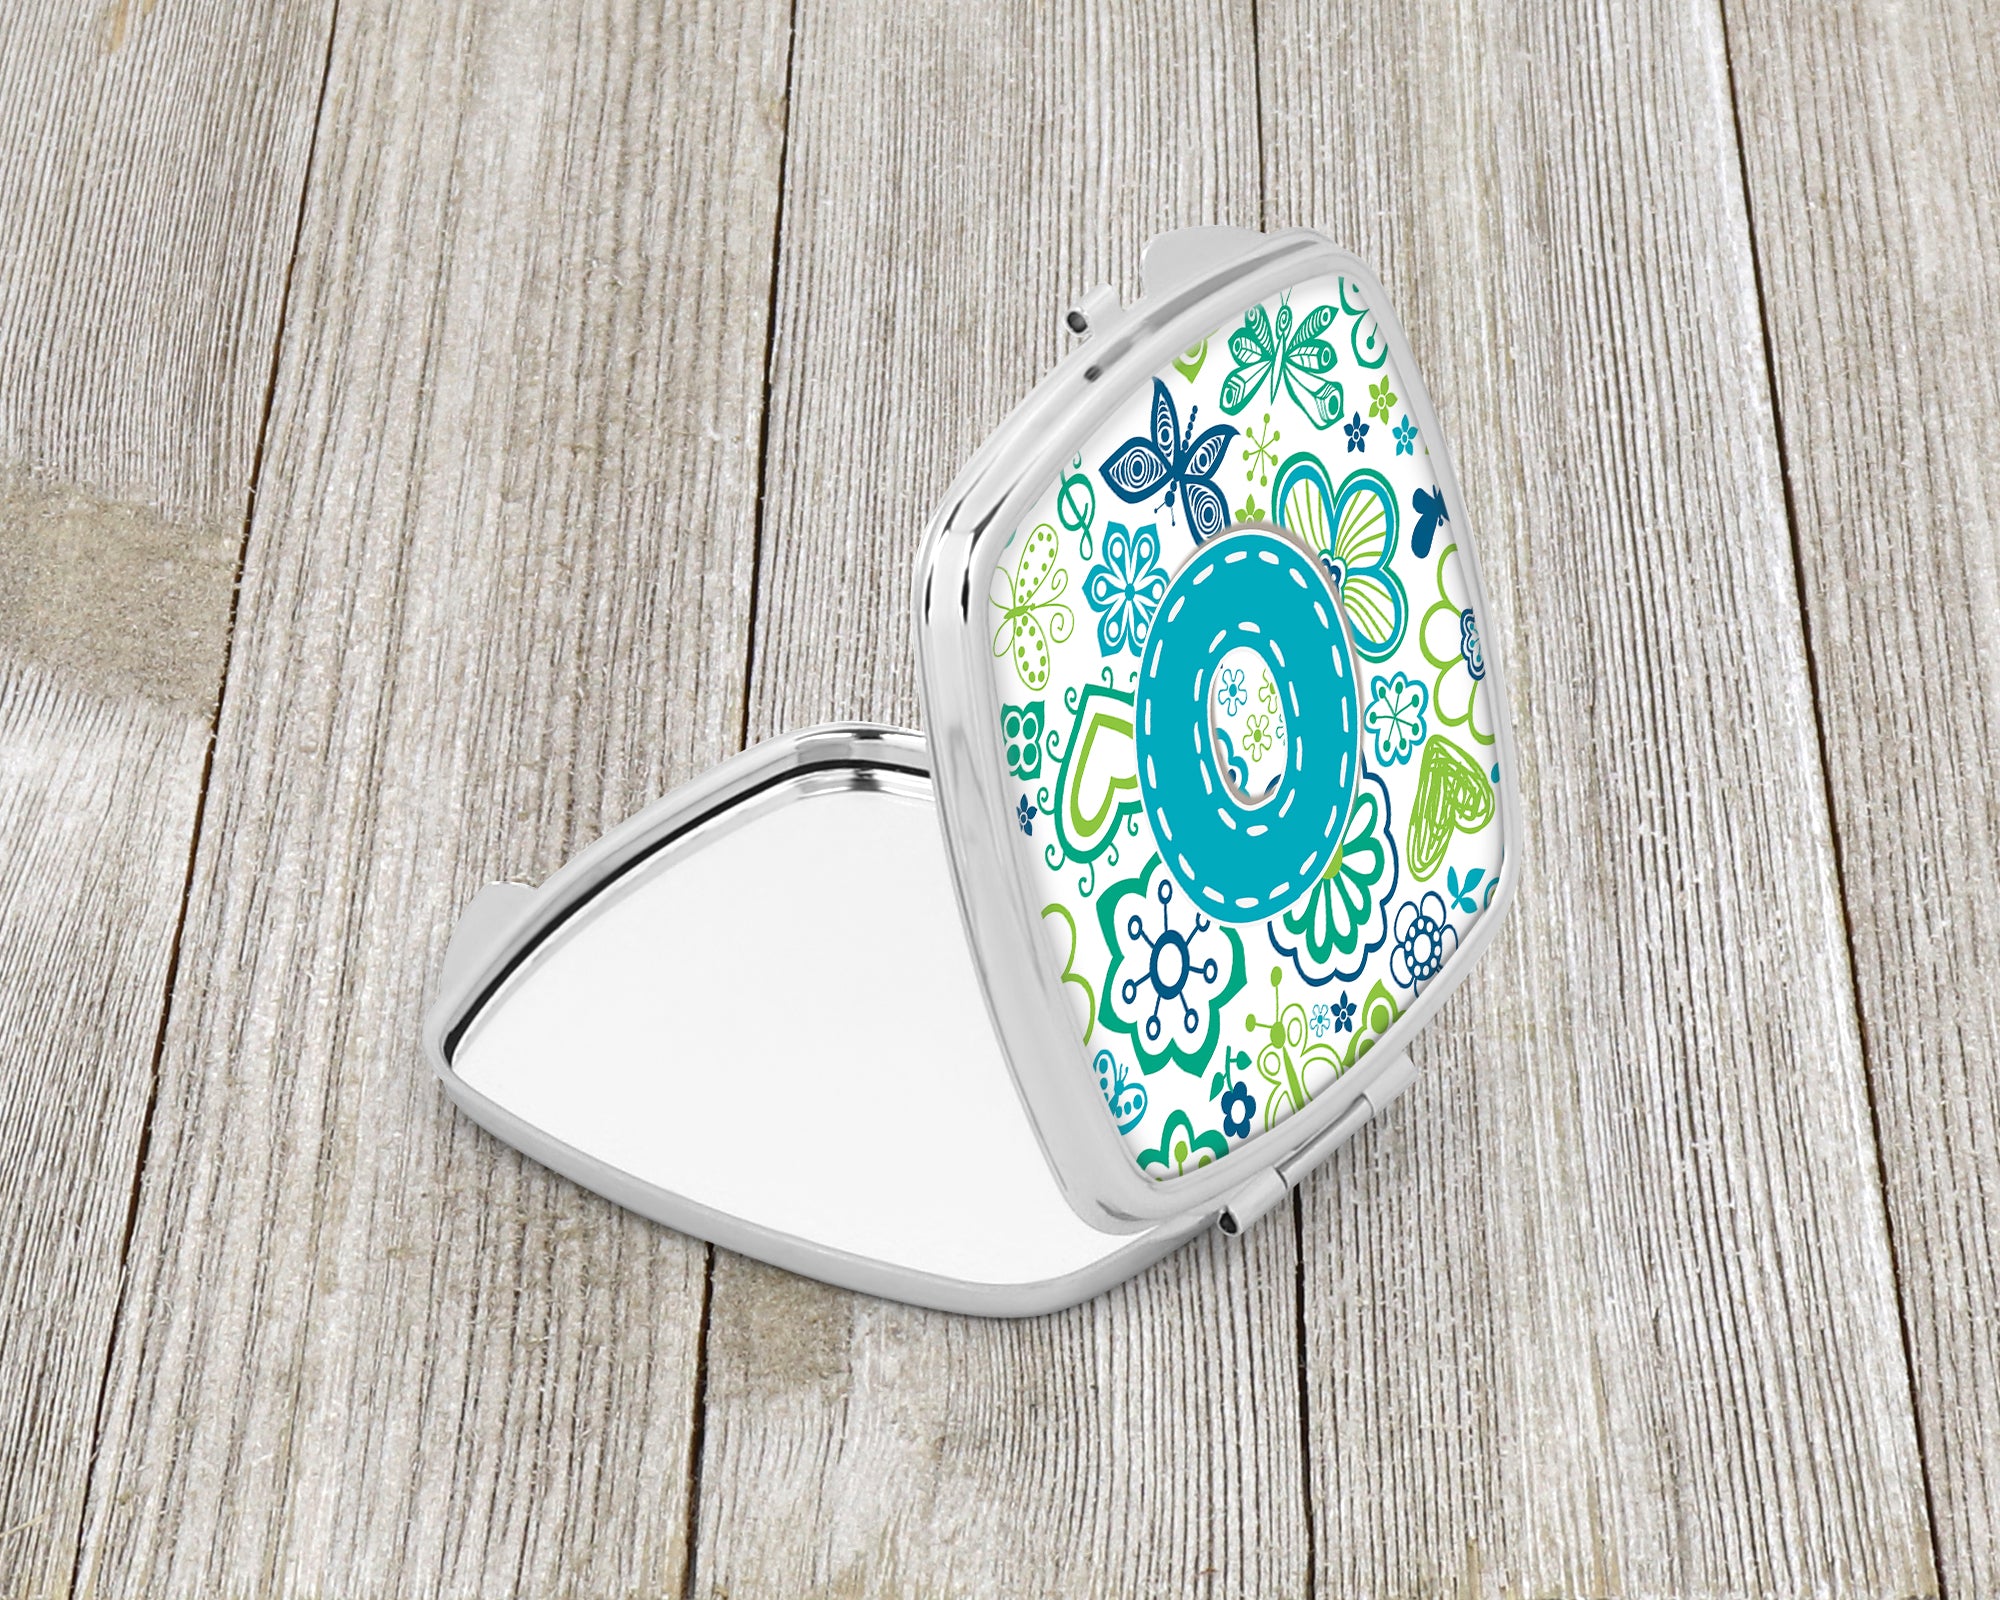 Letter O Flowers and Butterflies Teal Blue Compact Mirror CJ2006-OSCM